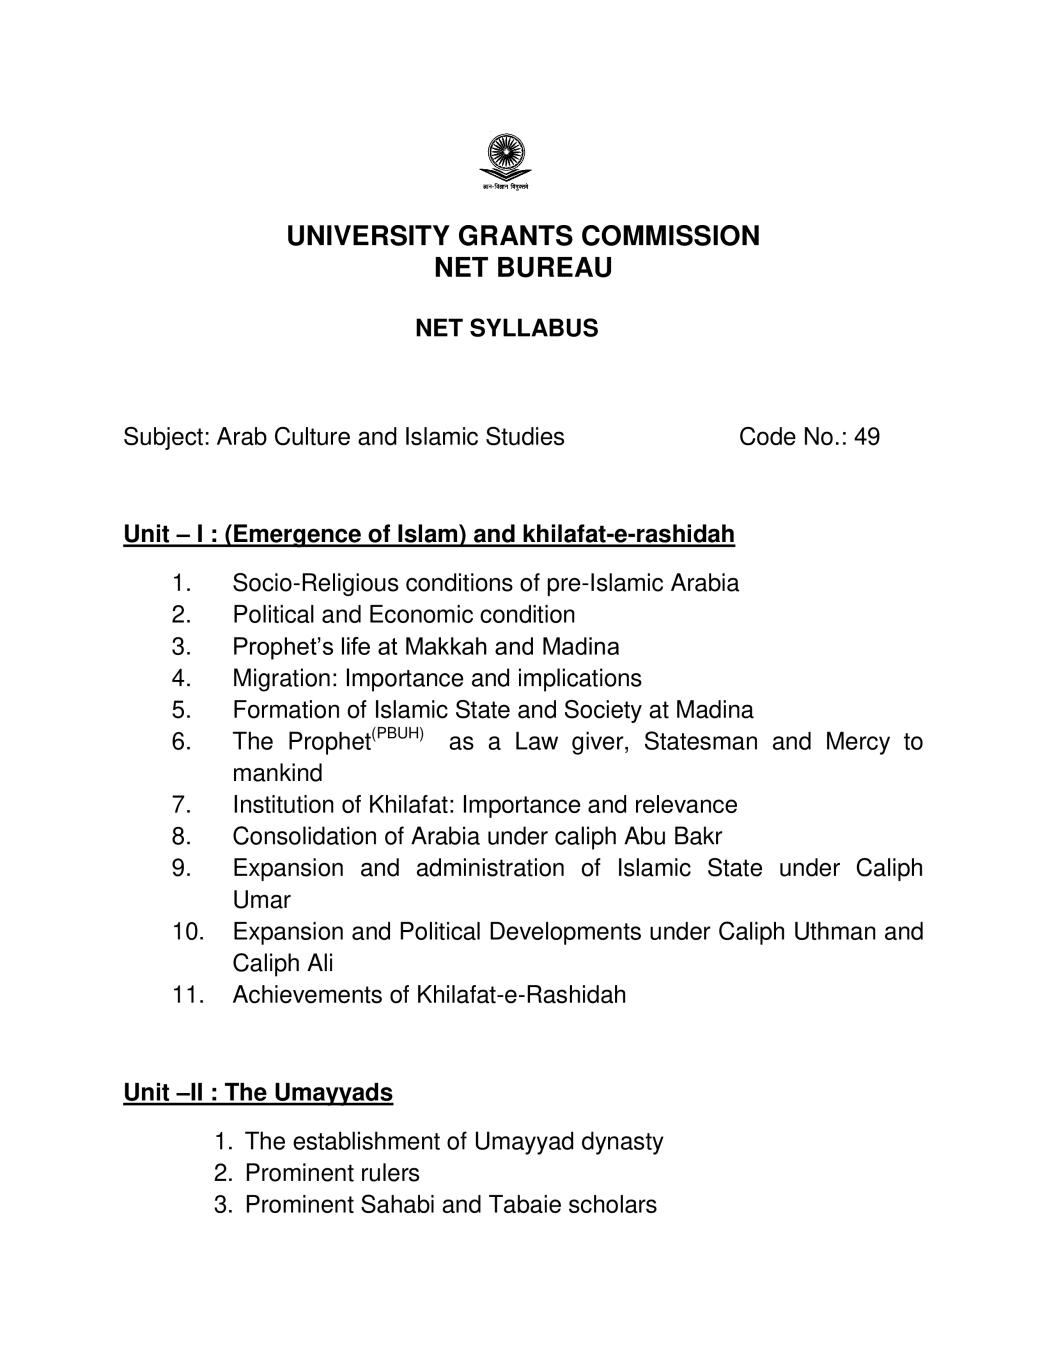 UGC NET Syllabus for Arab Culture and Islamic Studies 2020 - Page 1